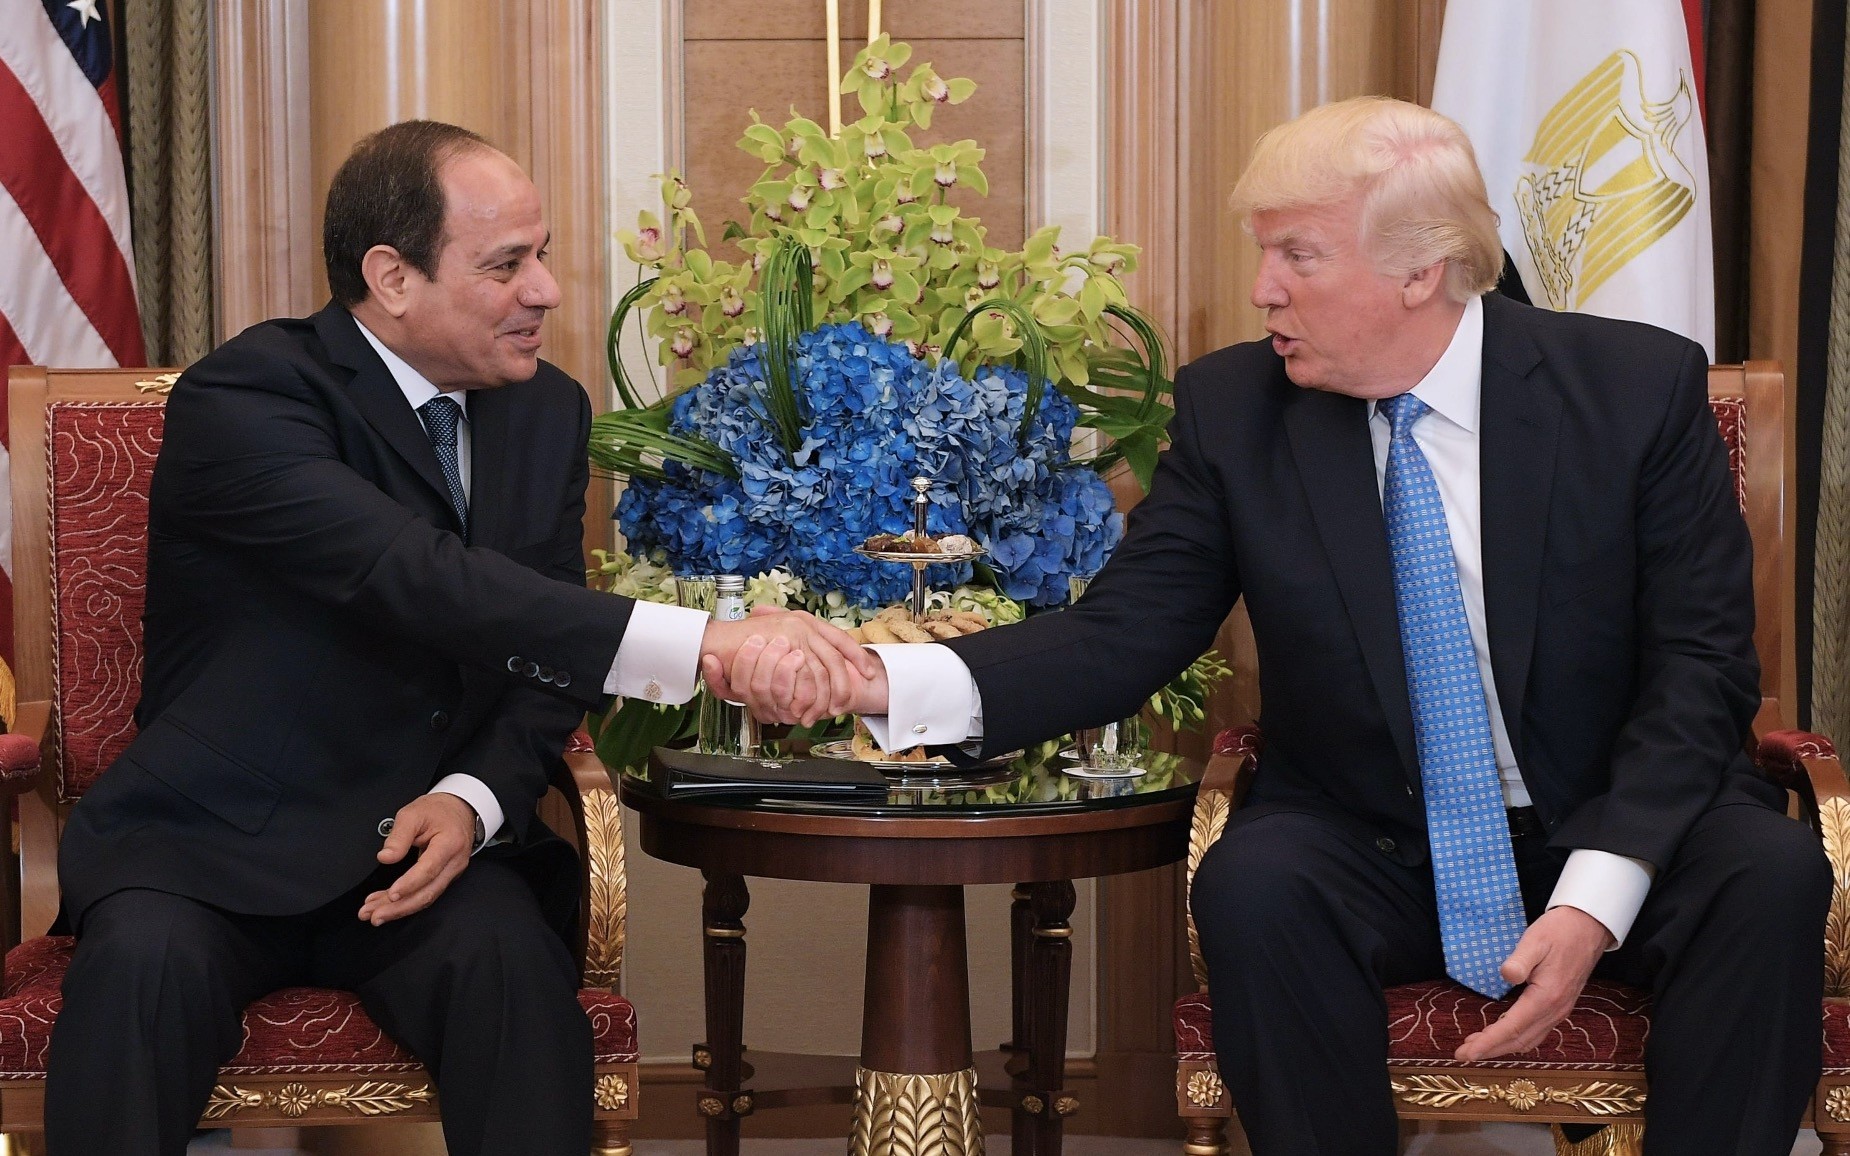 Trump and el-Sissi shake hands during a meeting in Riyadh in 2017.